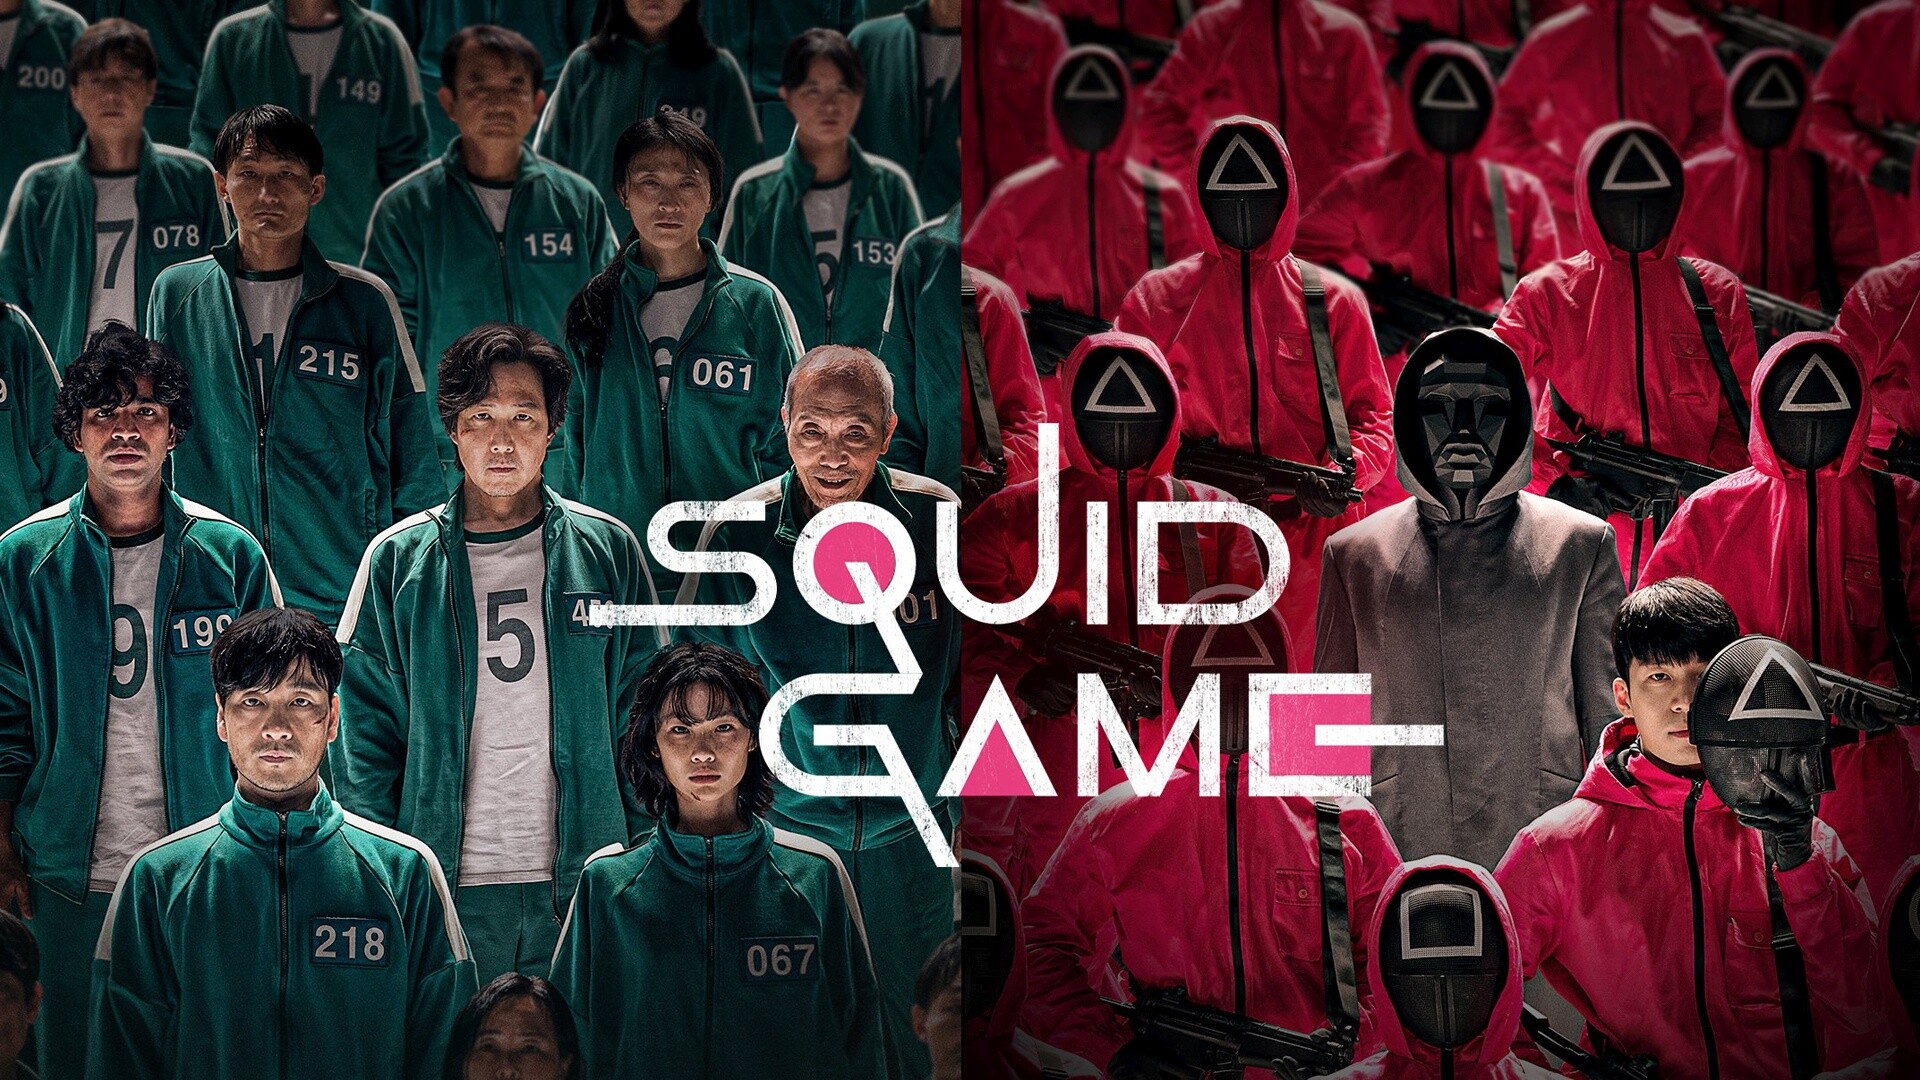 Squid Game: Netflix's most-watched series at its launch, Seong Gi-hun. 1920x1080 Full HD Background.